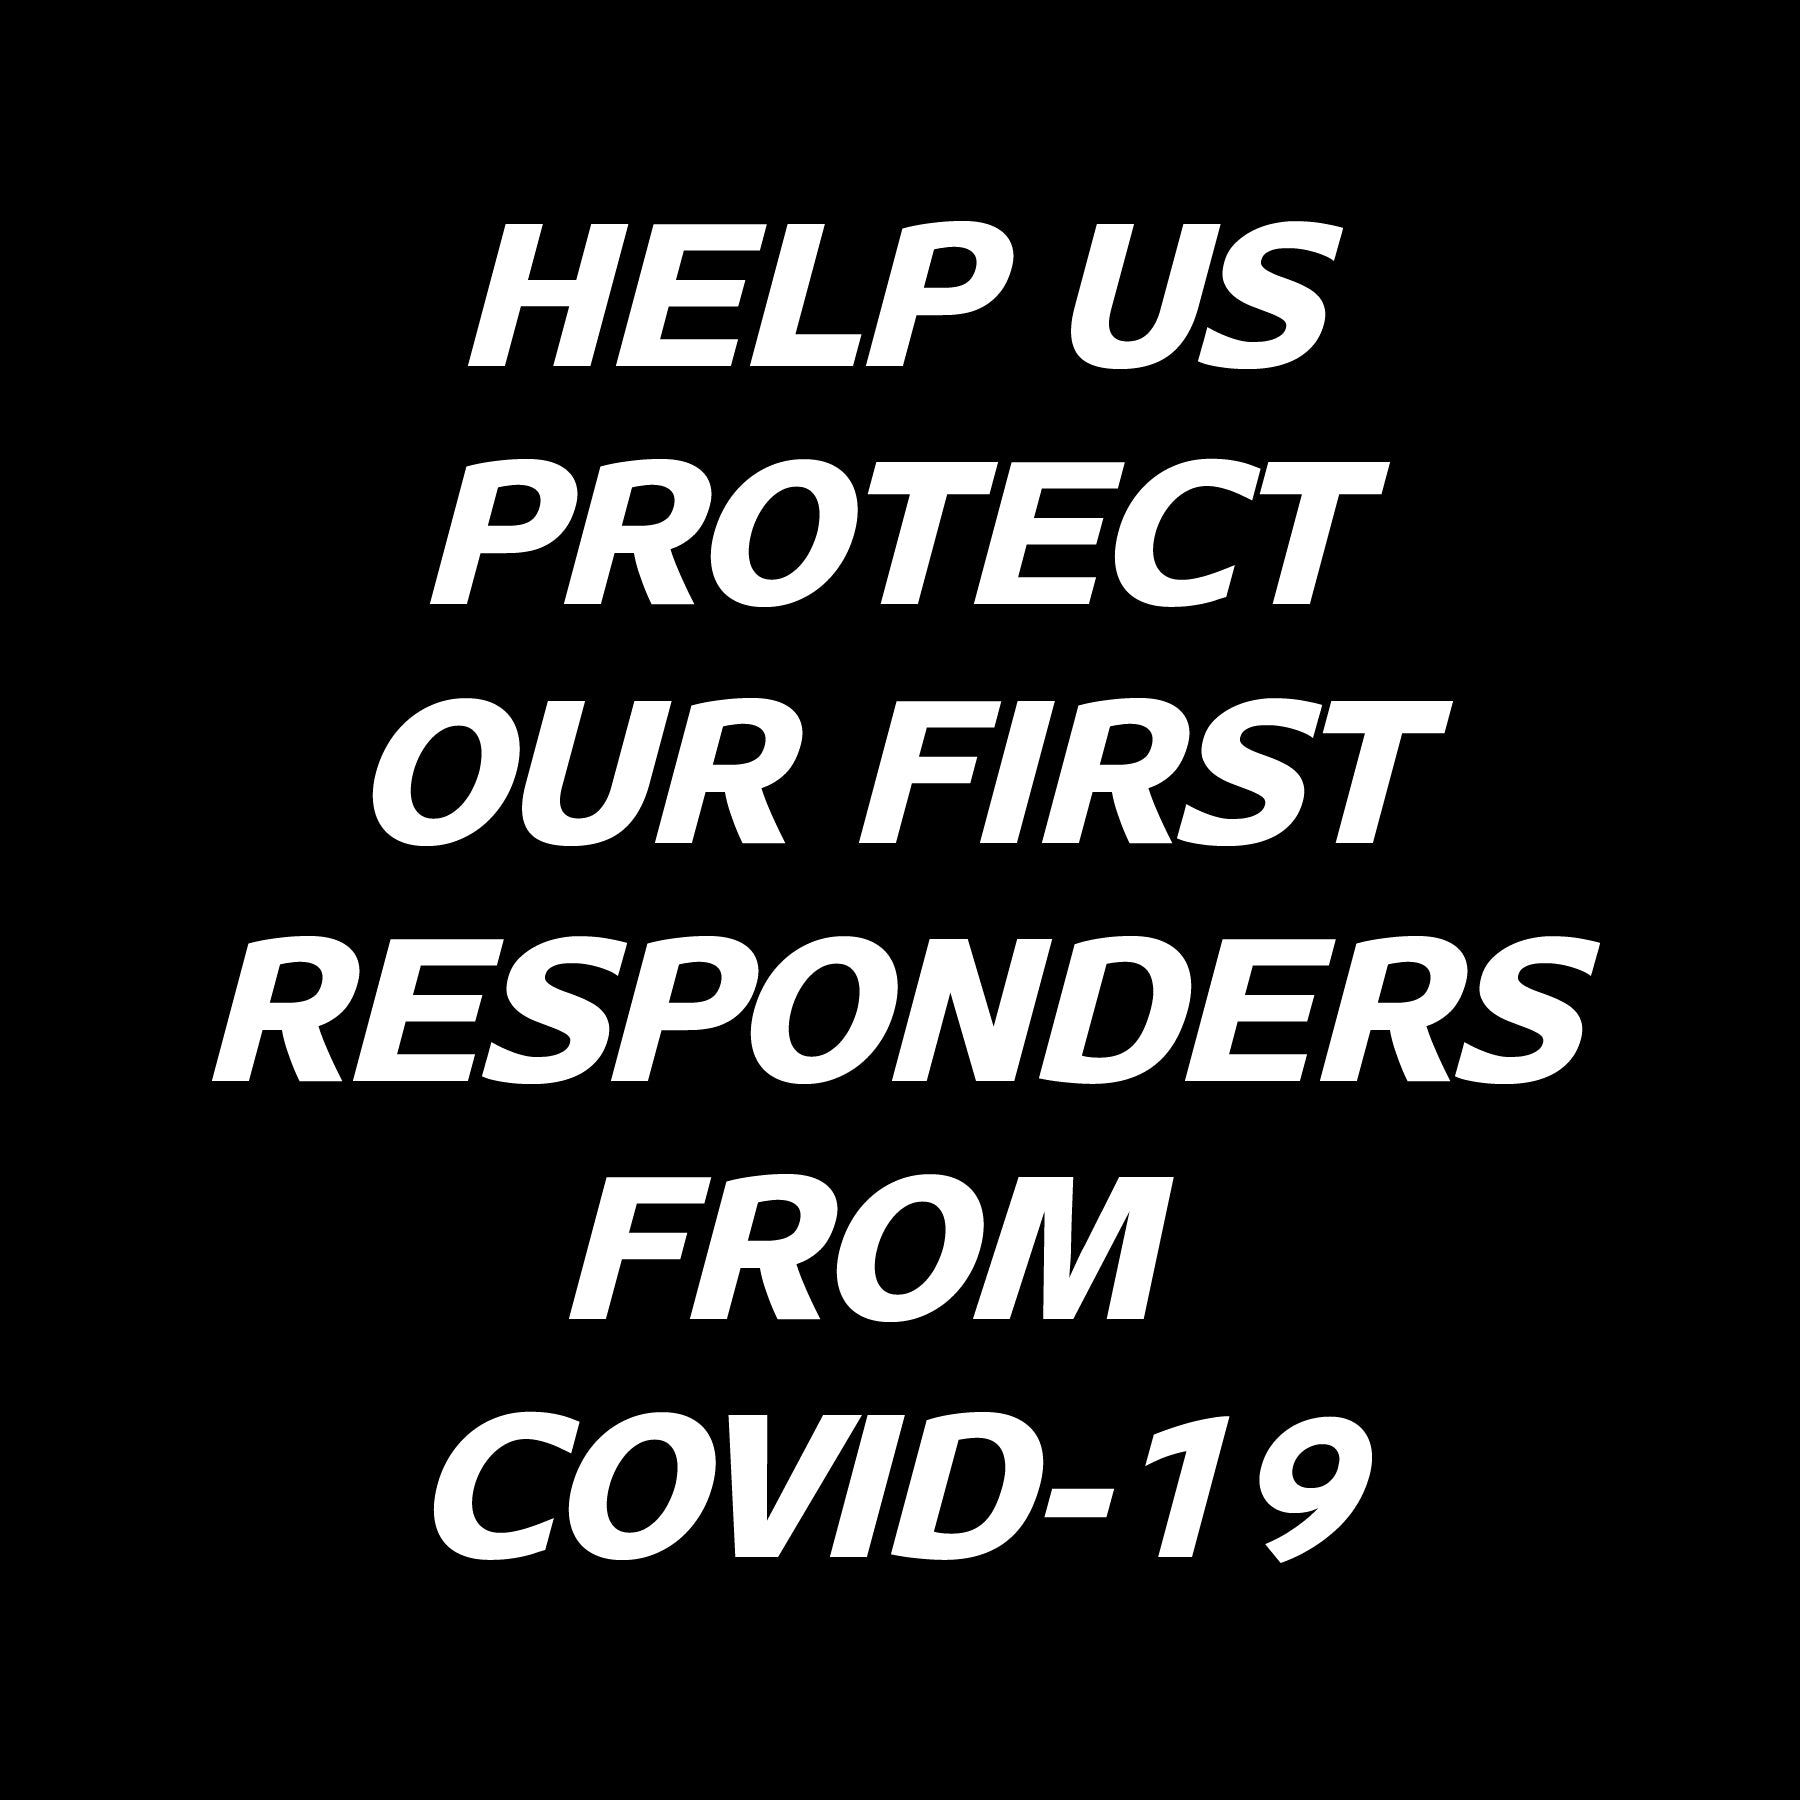 Altitude Hobbies proudly supports our first responders amidst Covid-19. See how you can help us help them